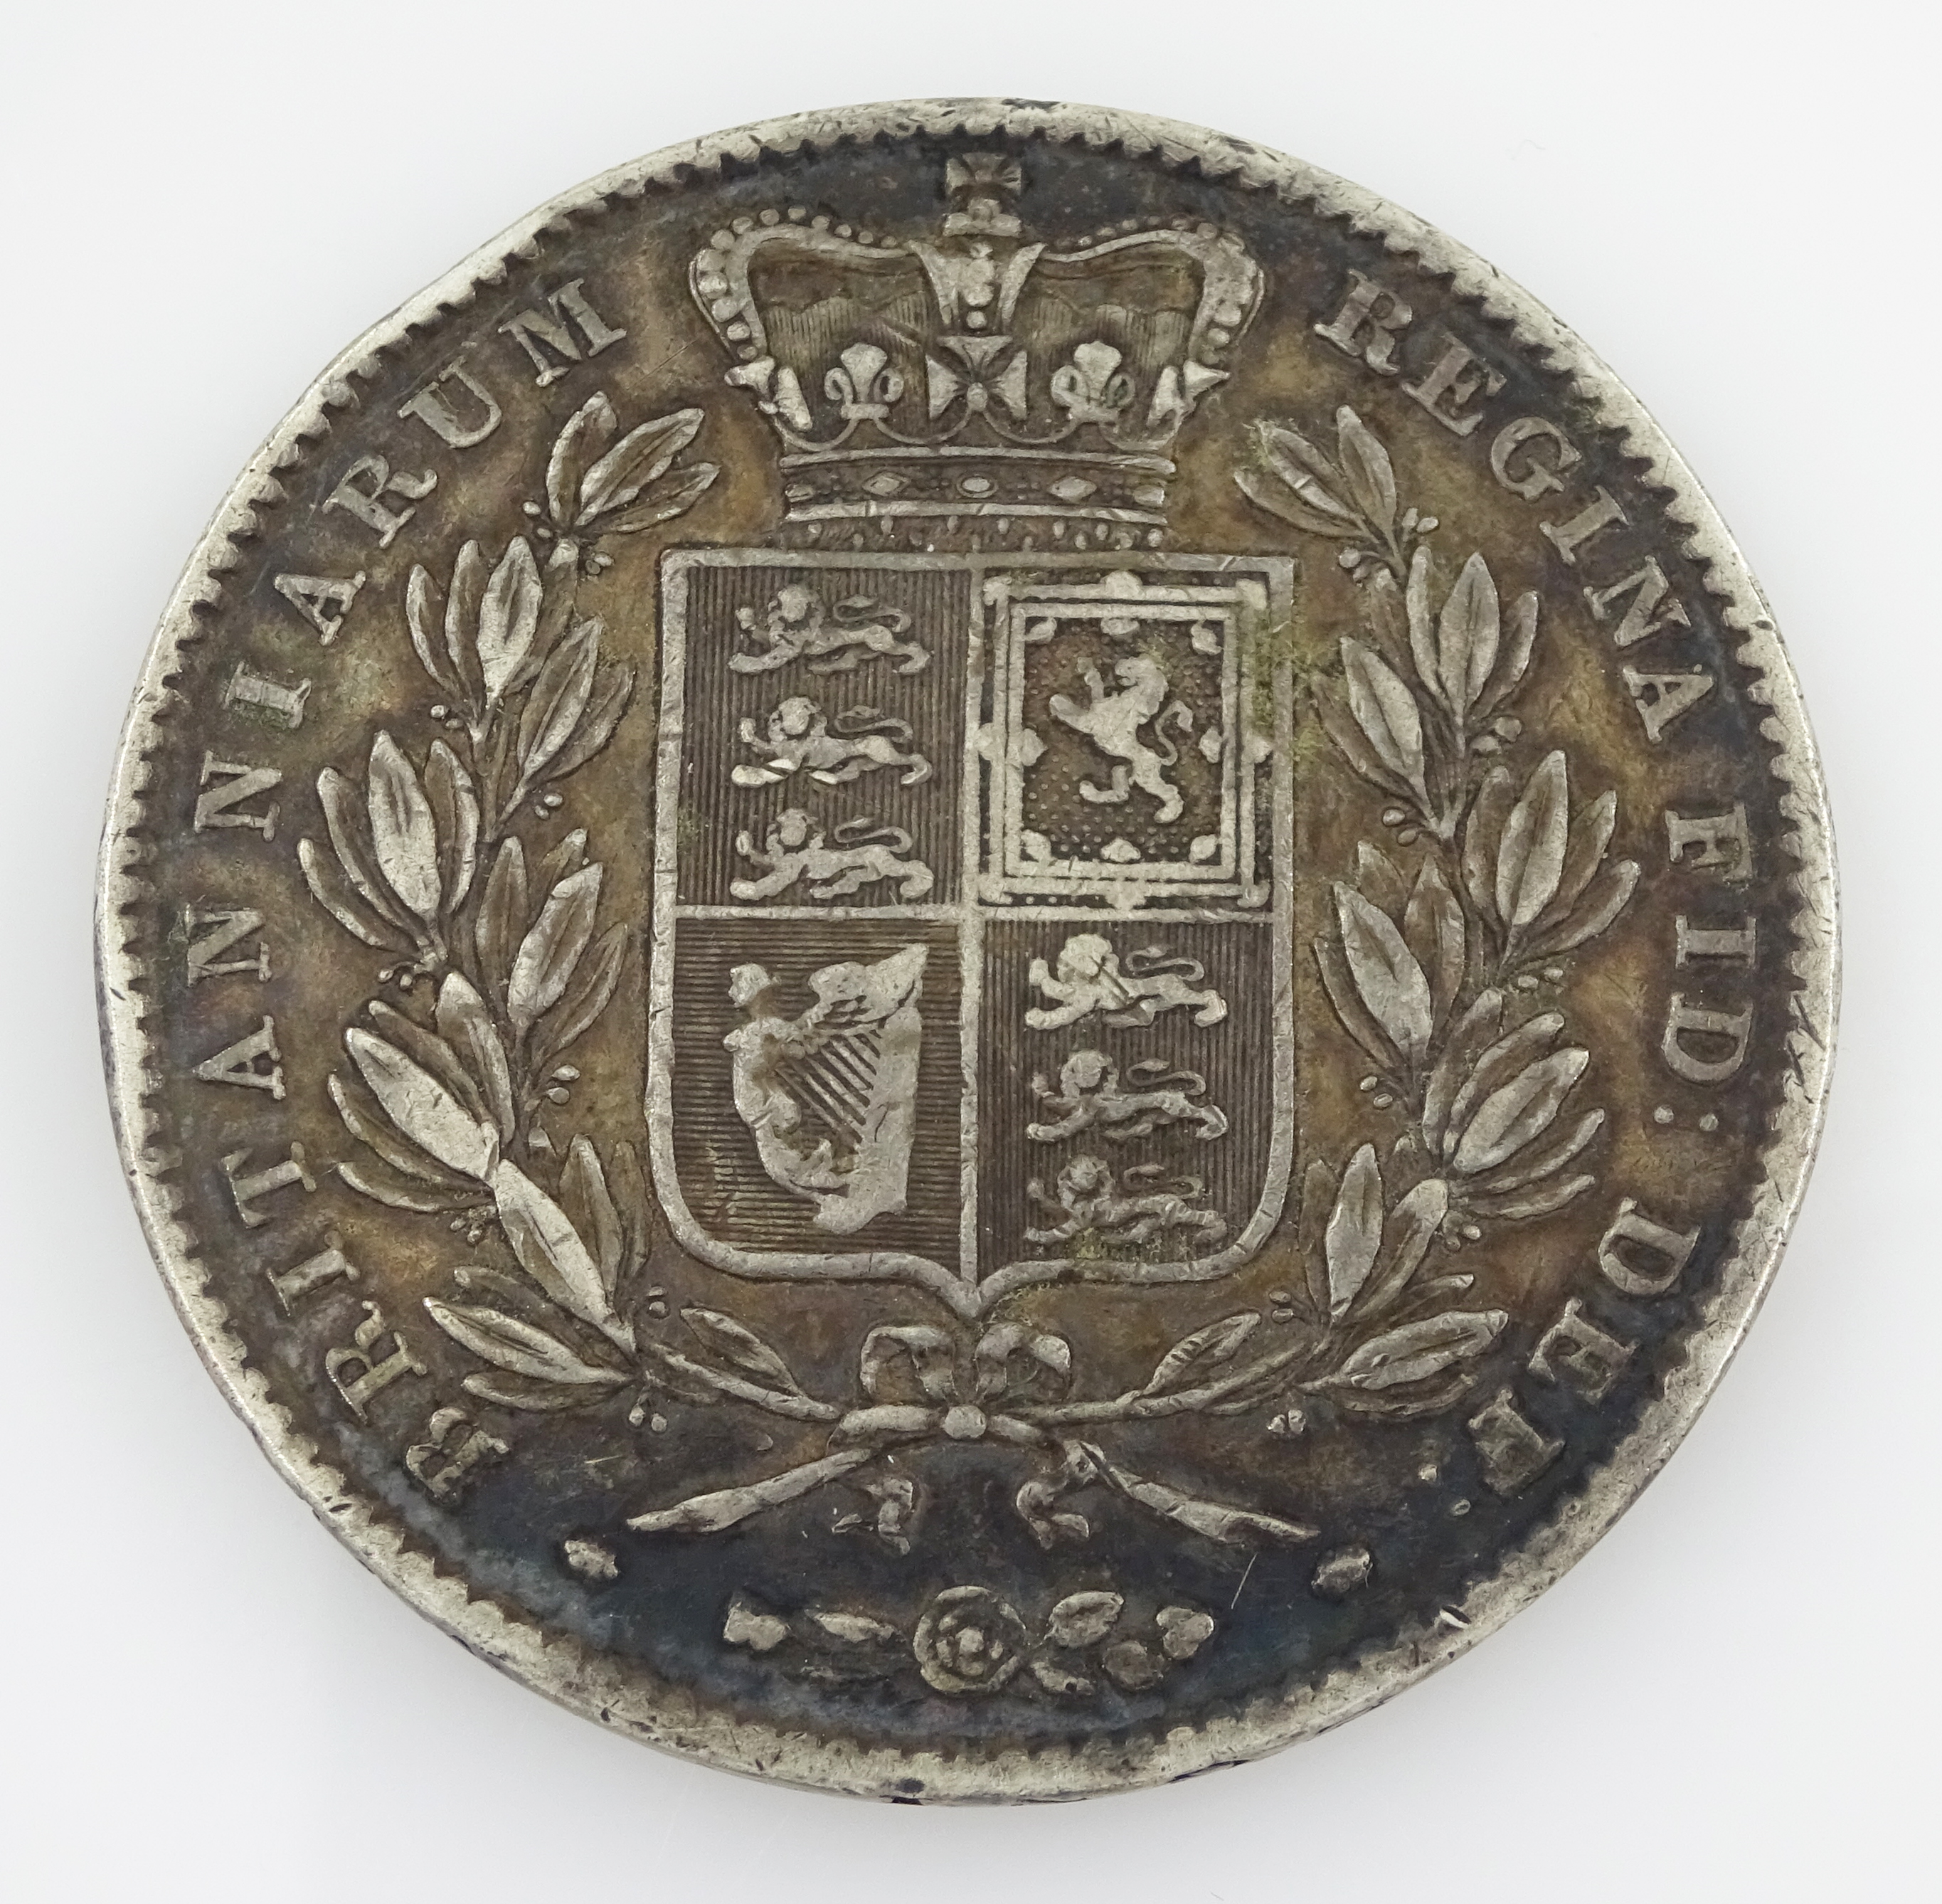 Queen Victoria 1844 crown coin - Image 2 of 2